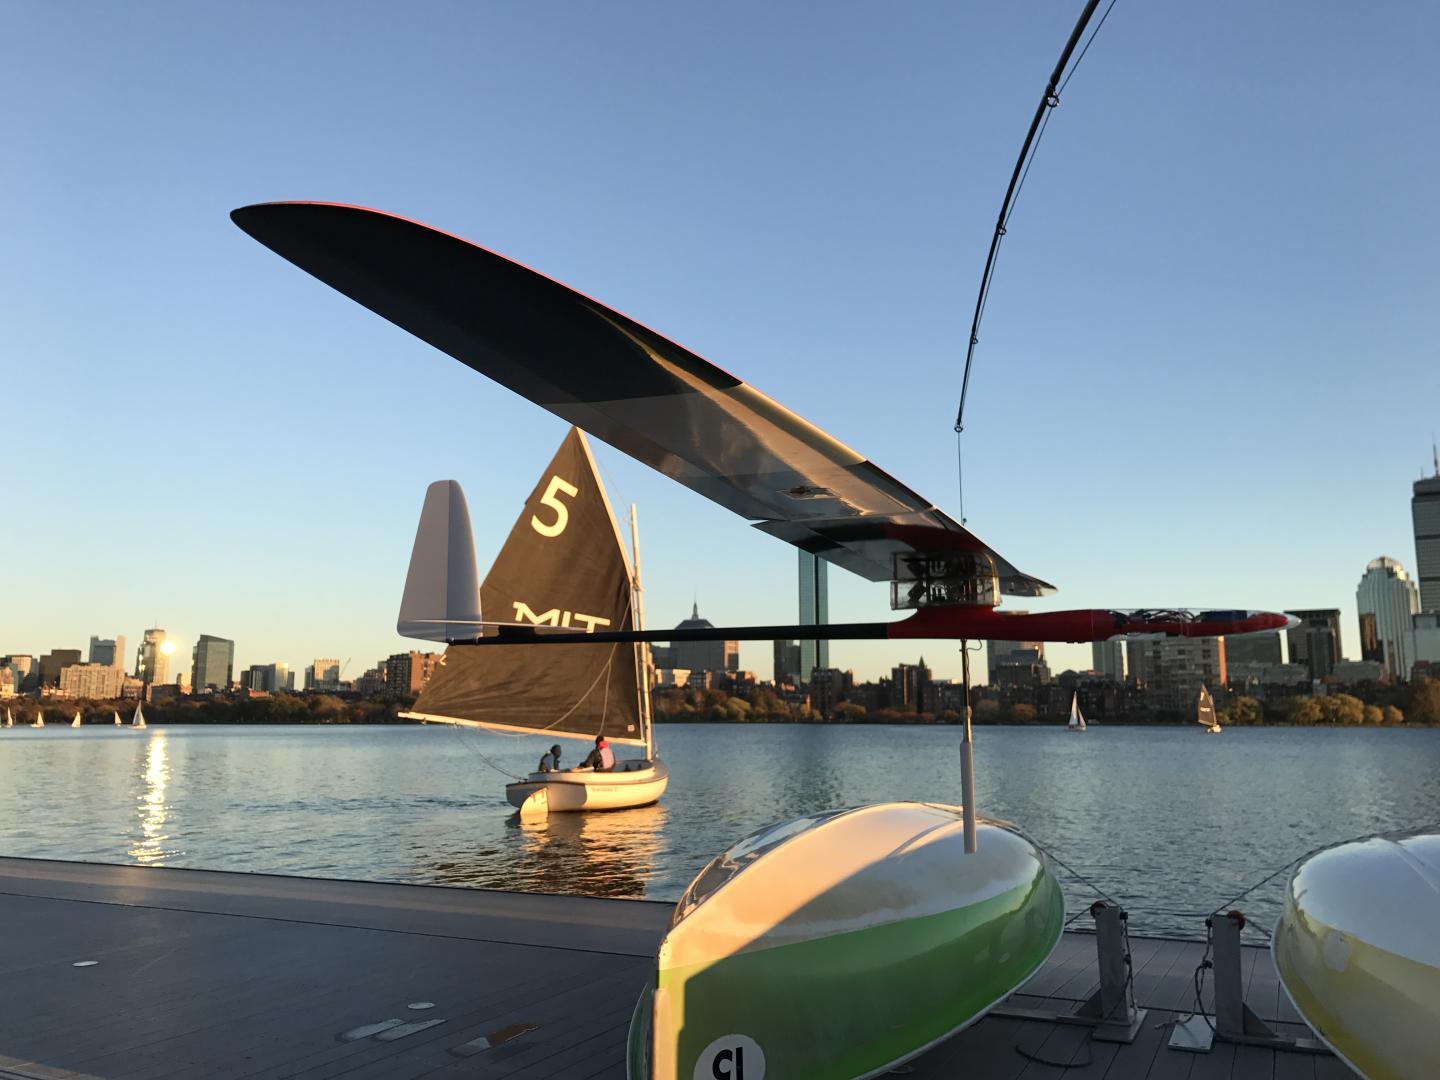 An albatross glider, designed by MIT engineers, skims the Charles River. (Source: Gabriel Bousquet)